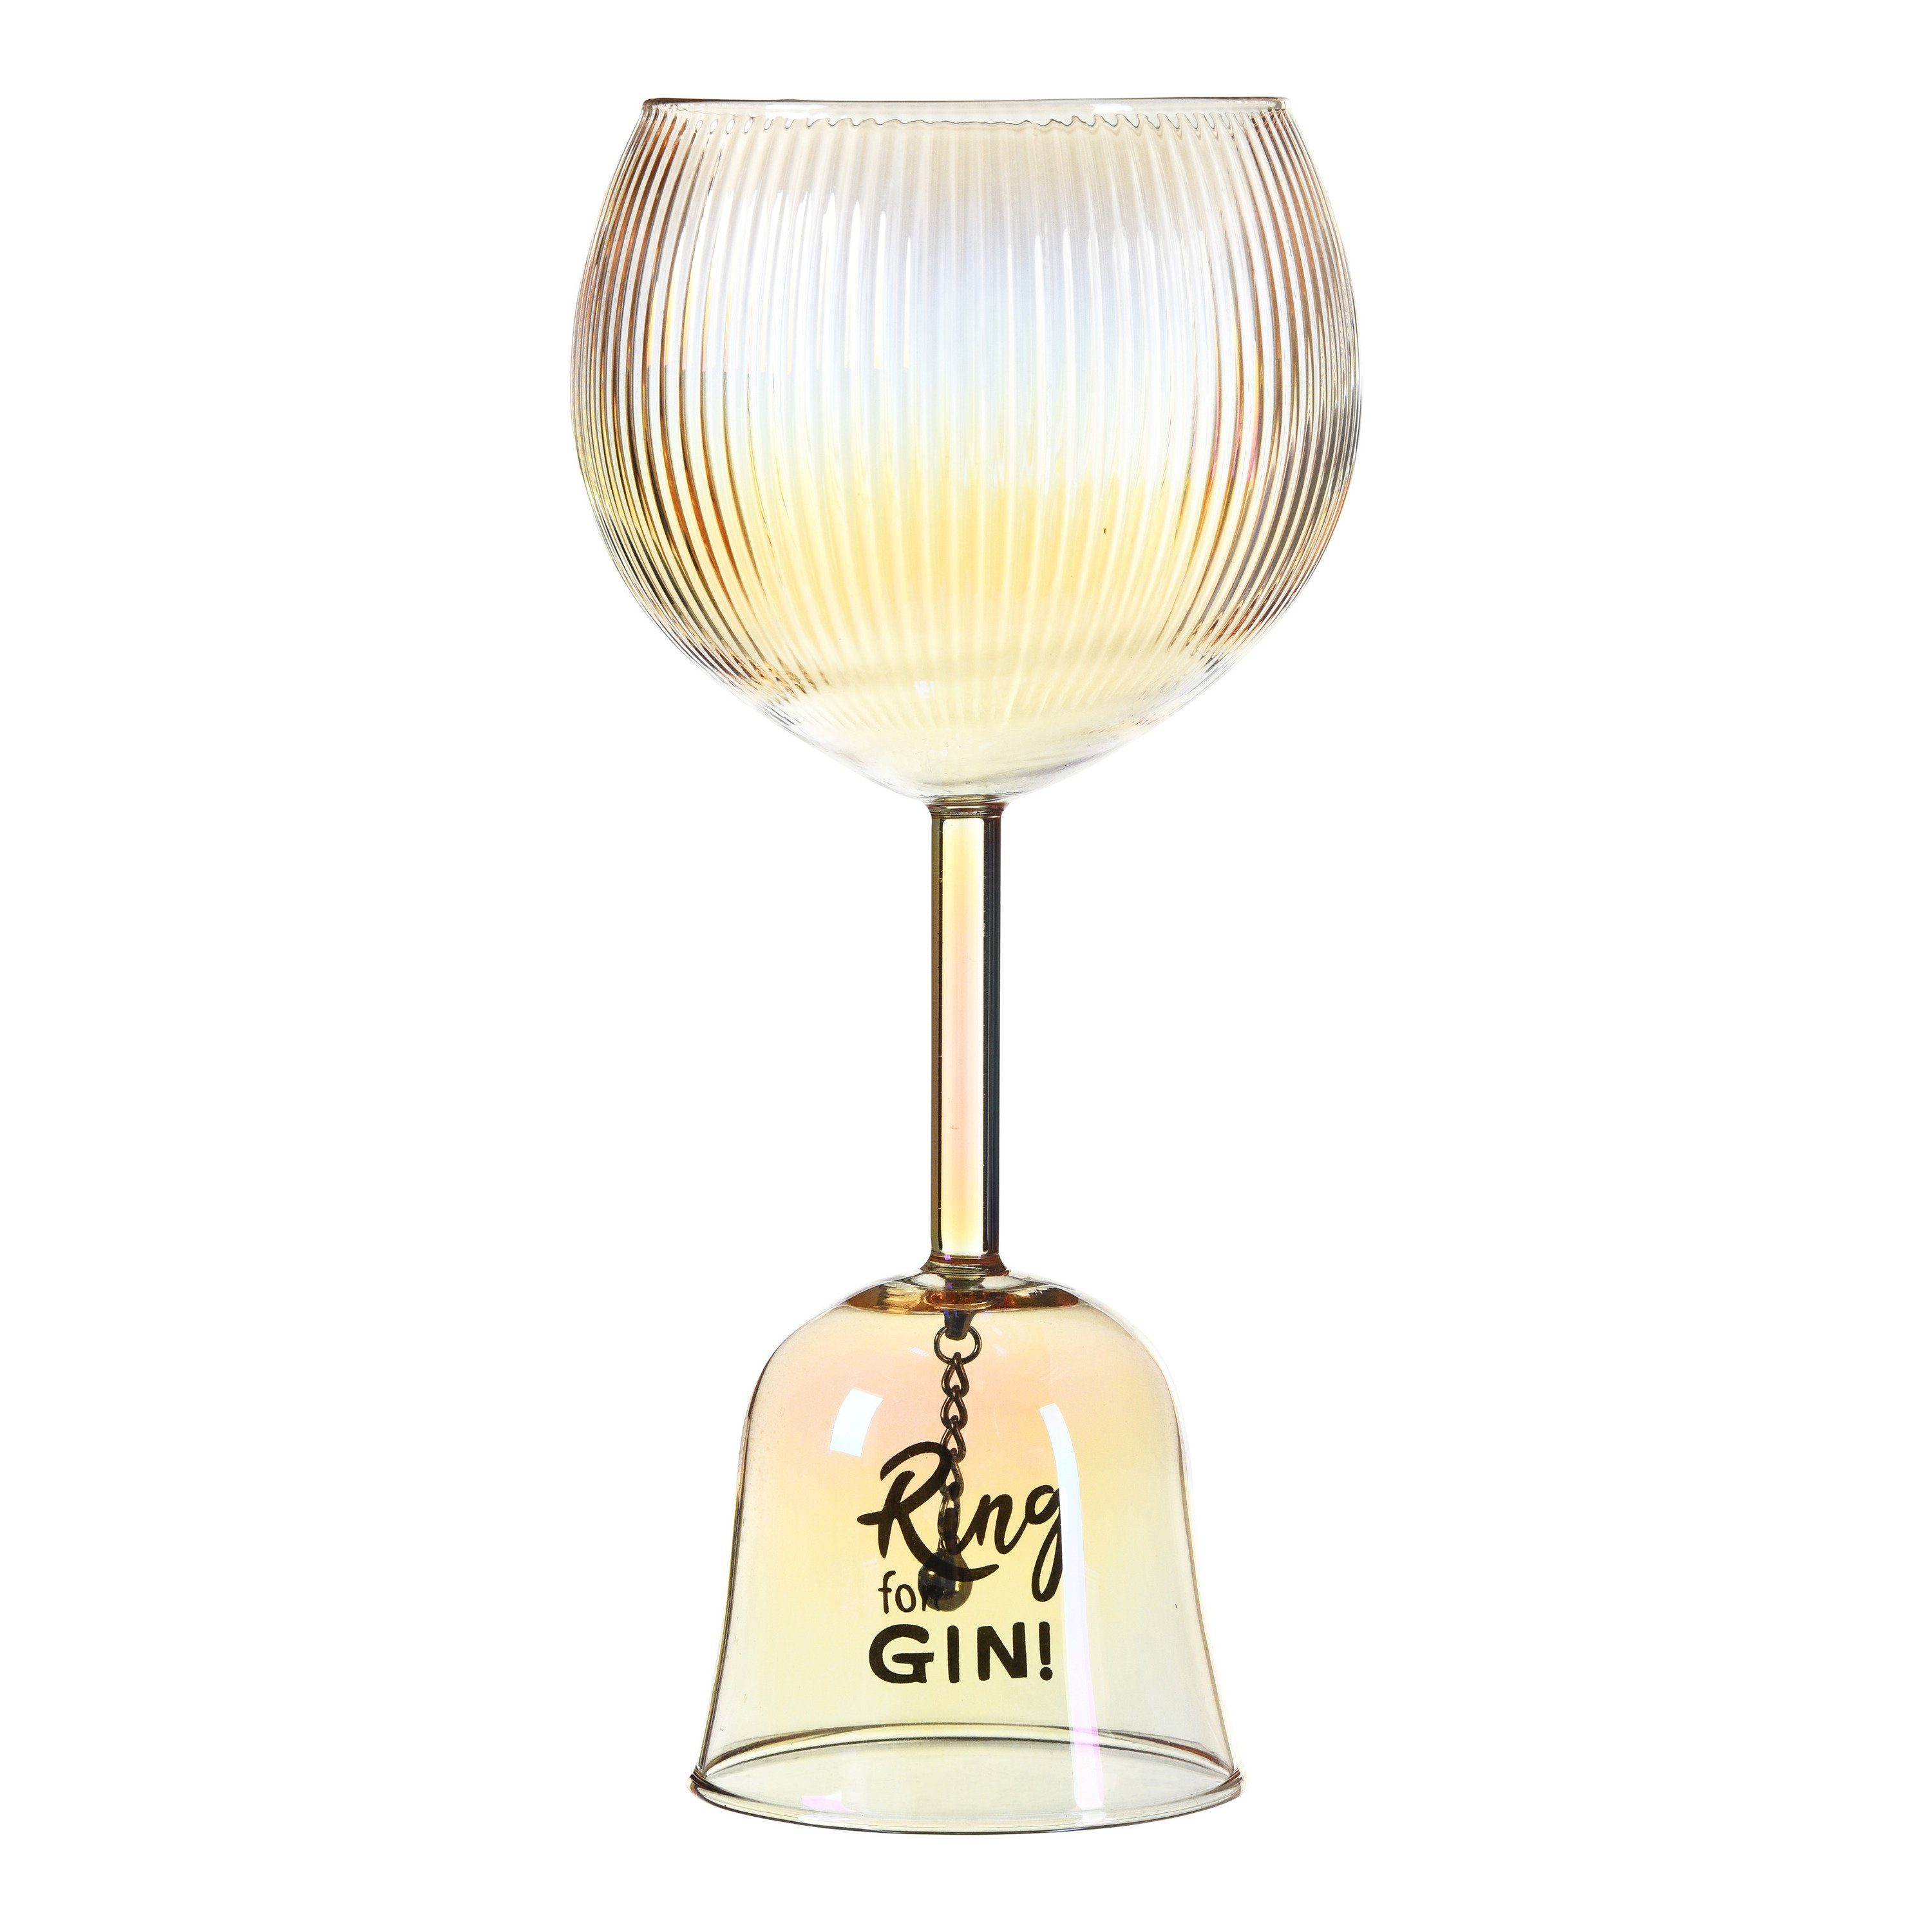 Gin, 98% for Glas Trinkglas 2% Glas, Metall Ring Depot